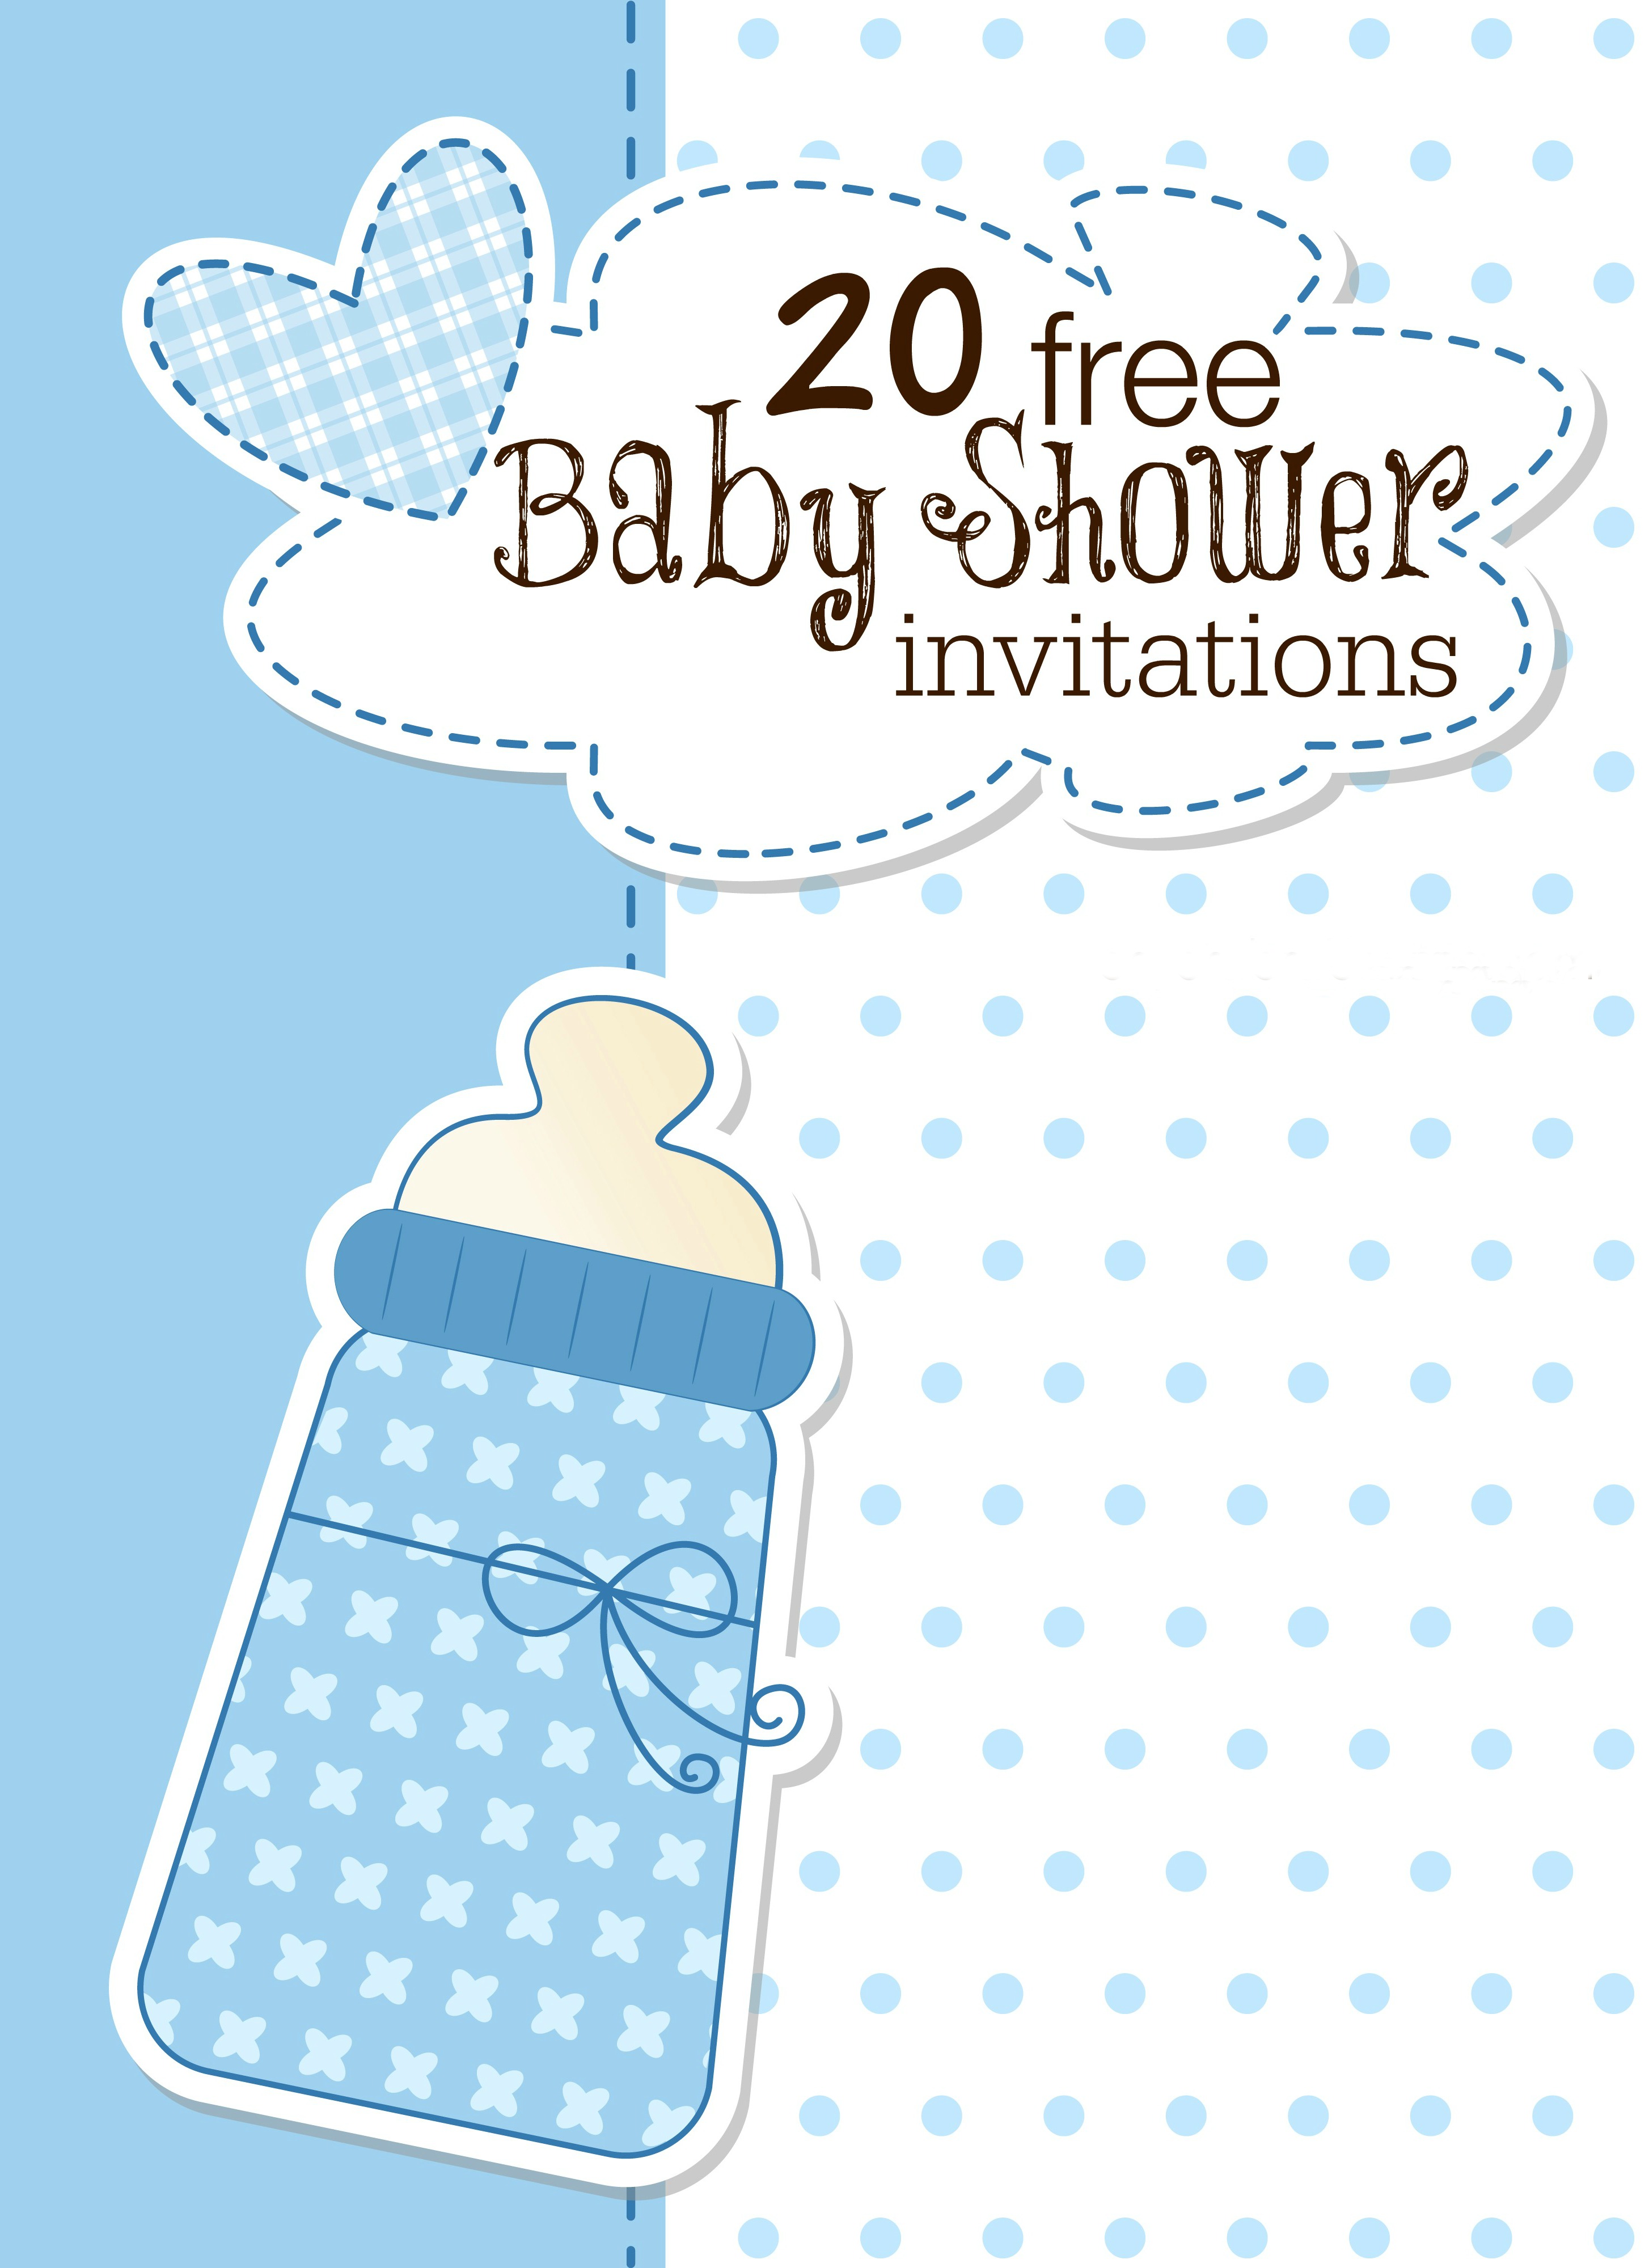 Full Size of Baby Shower:free Printable Baby Shower Games Elegant Baby Shower Baby Shower Centerpiece Ideas For Boys Nursery For Girls Nautical Baby Shower Invitations For Boys Baby Girl Themes For Bedroom Baby Shower Ideas Baby Shower Decorations Themes For Baby Girl Nursery